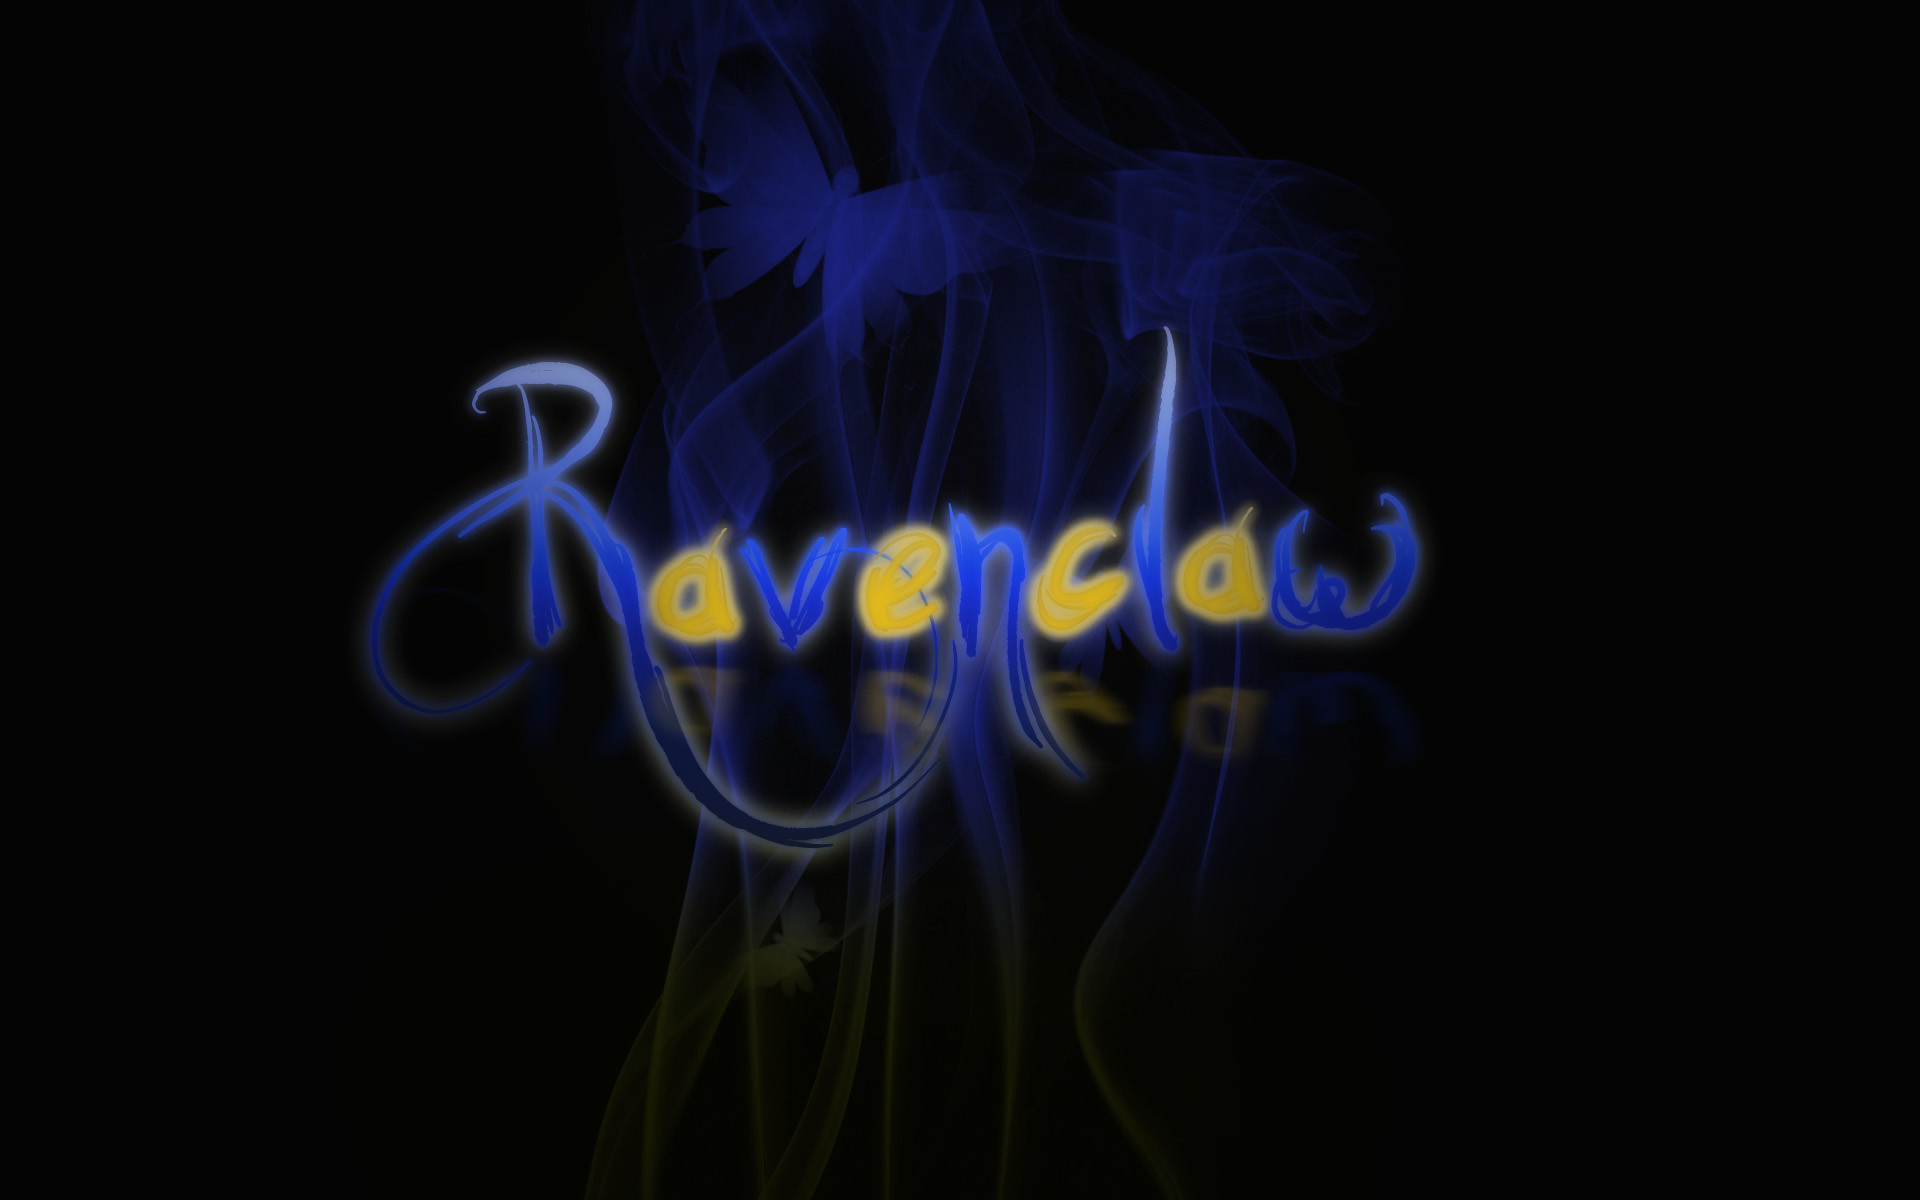 Ravenclaw Iphone Wallpapers